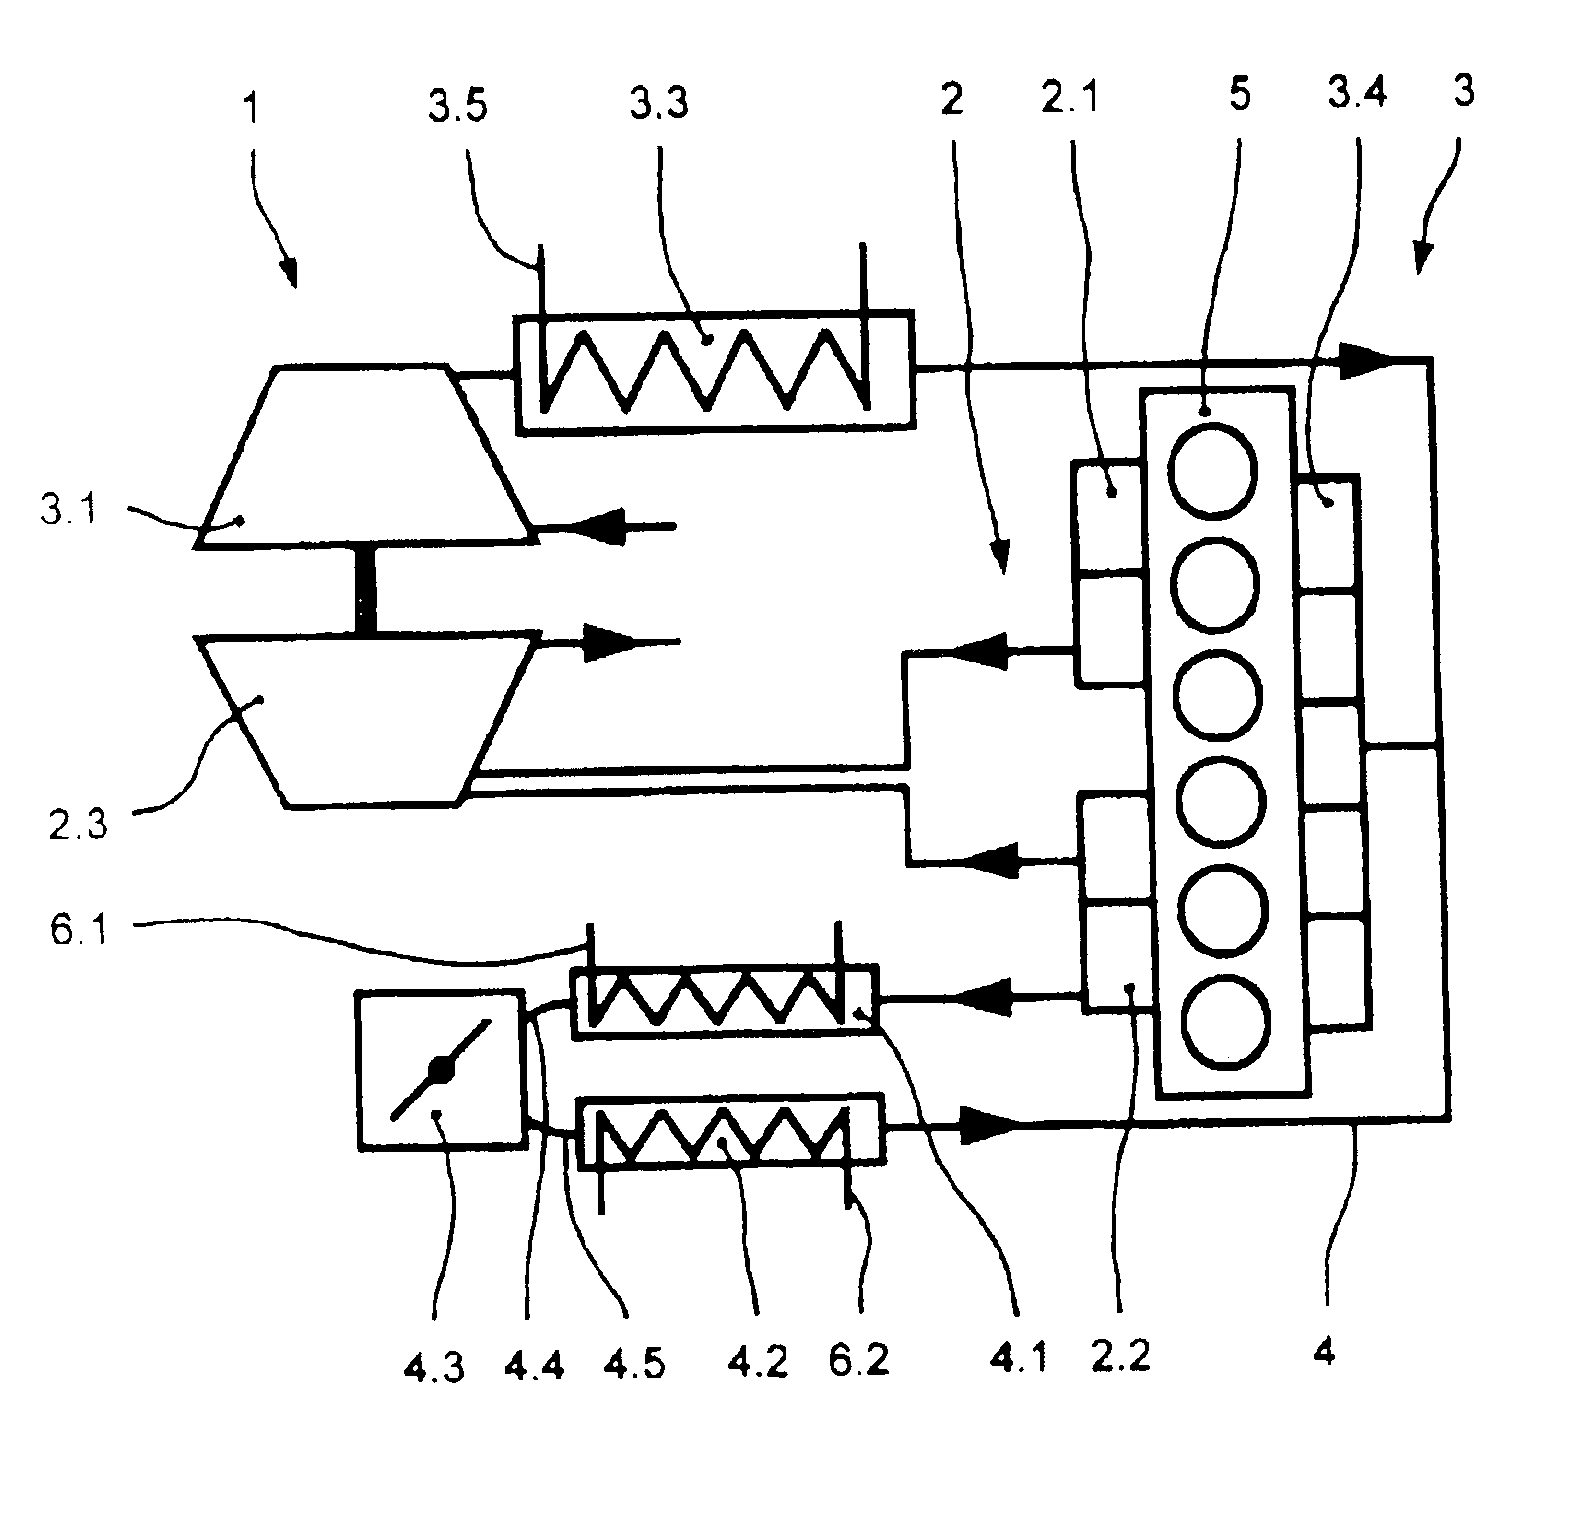 Exhaust-gas recirculation system of an internal combustion engine